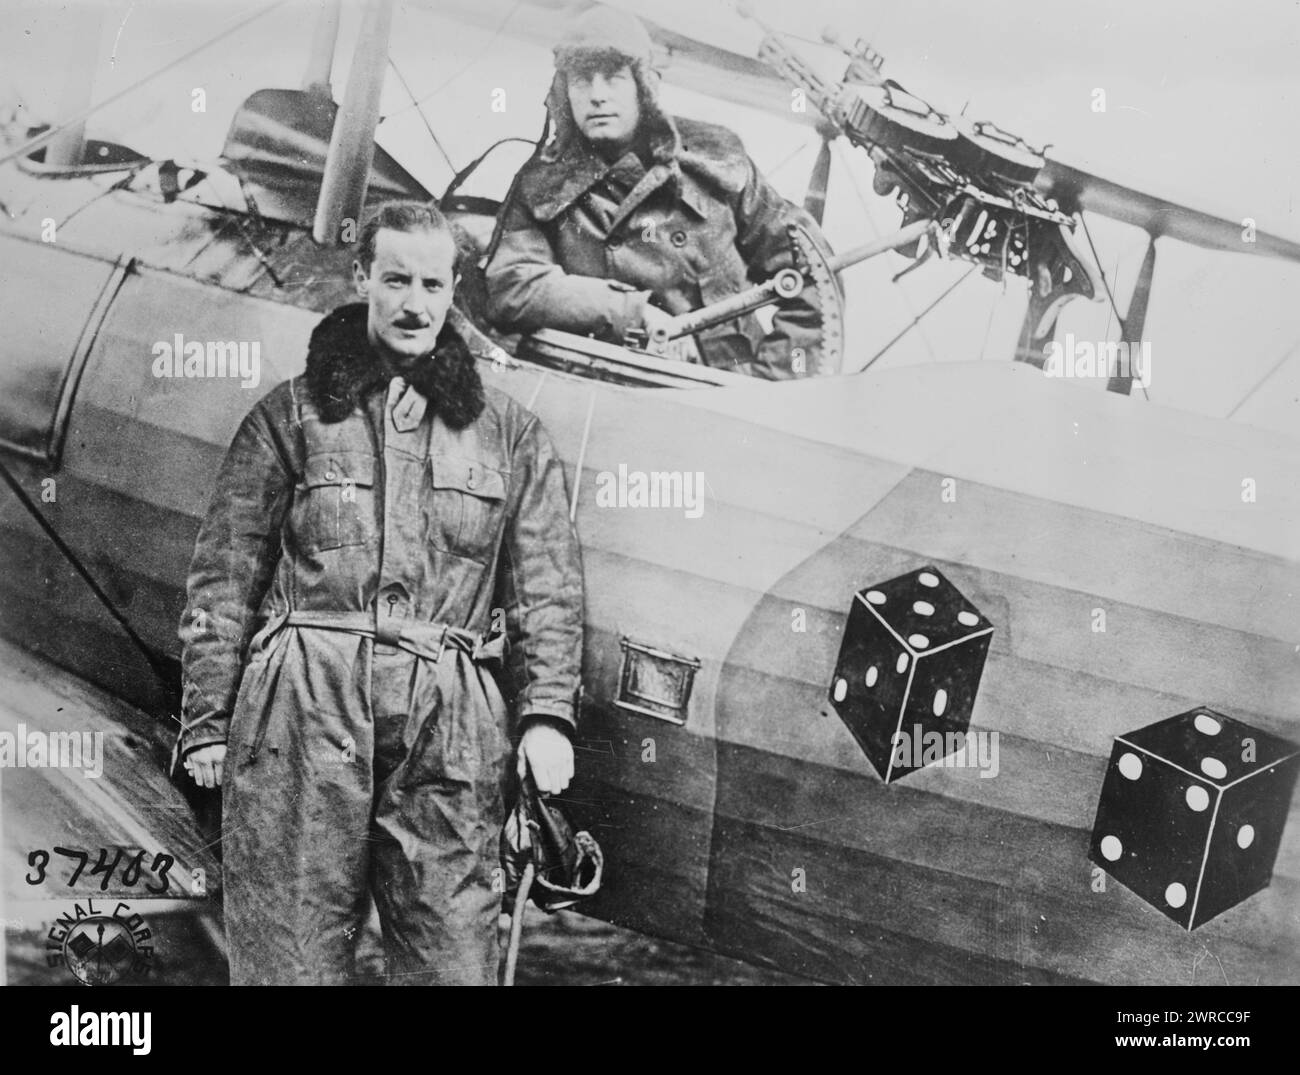 Capt. W.C. Schauffler Jr. & Lt. F.A. Tillman, Photograph shows Captain W.G. Schauffler, Jr. standing and Lieutenant Fred A. Tillman in the seat of a Ninetieth Aero Squadron (Pair-a-Dice' Squadron) airplane (Salmson 2A2). The gun on the airplane is a double Lewis machine gun. Photograph was taken in Bethelainville, Meuse, France on November 18, 1918 after World War I., 1918 Nov. 18, World War, 1914-1918, Glass negatives, 1 negative: glass Stock Photo